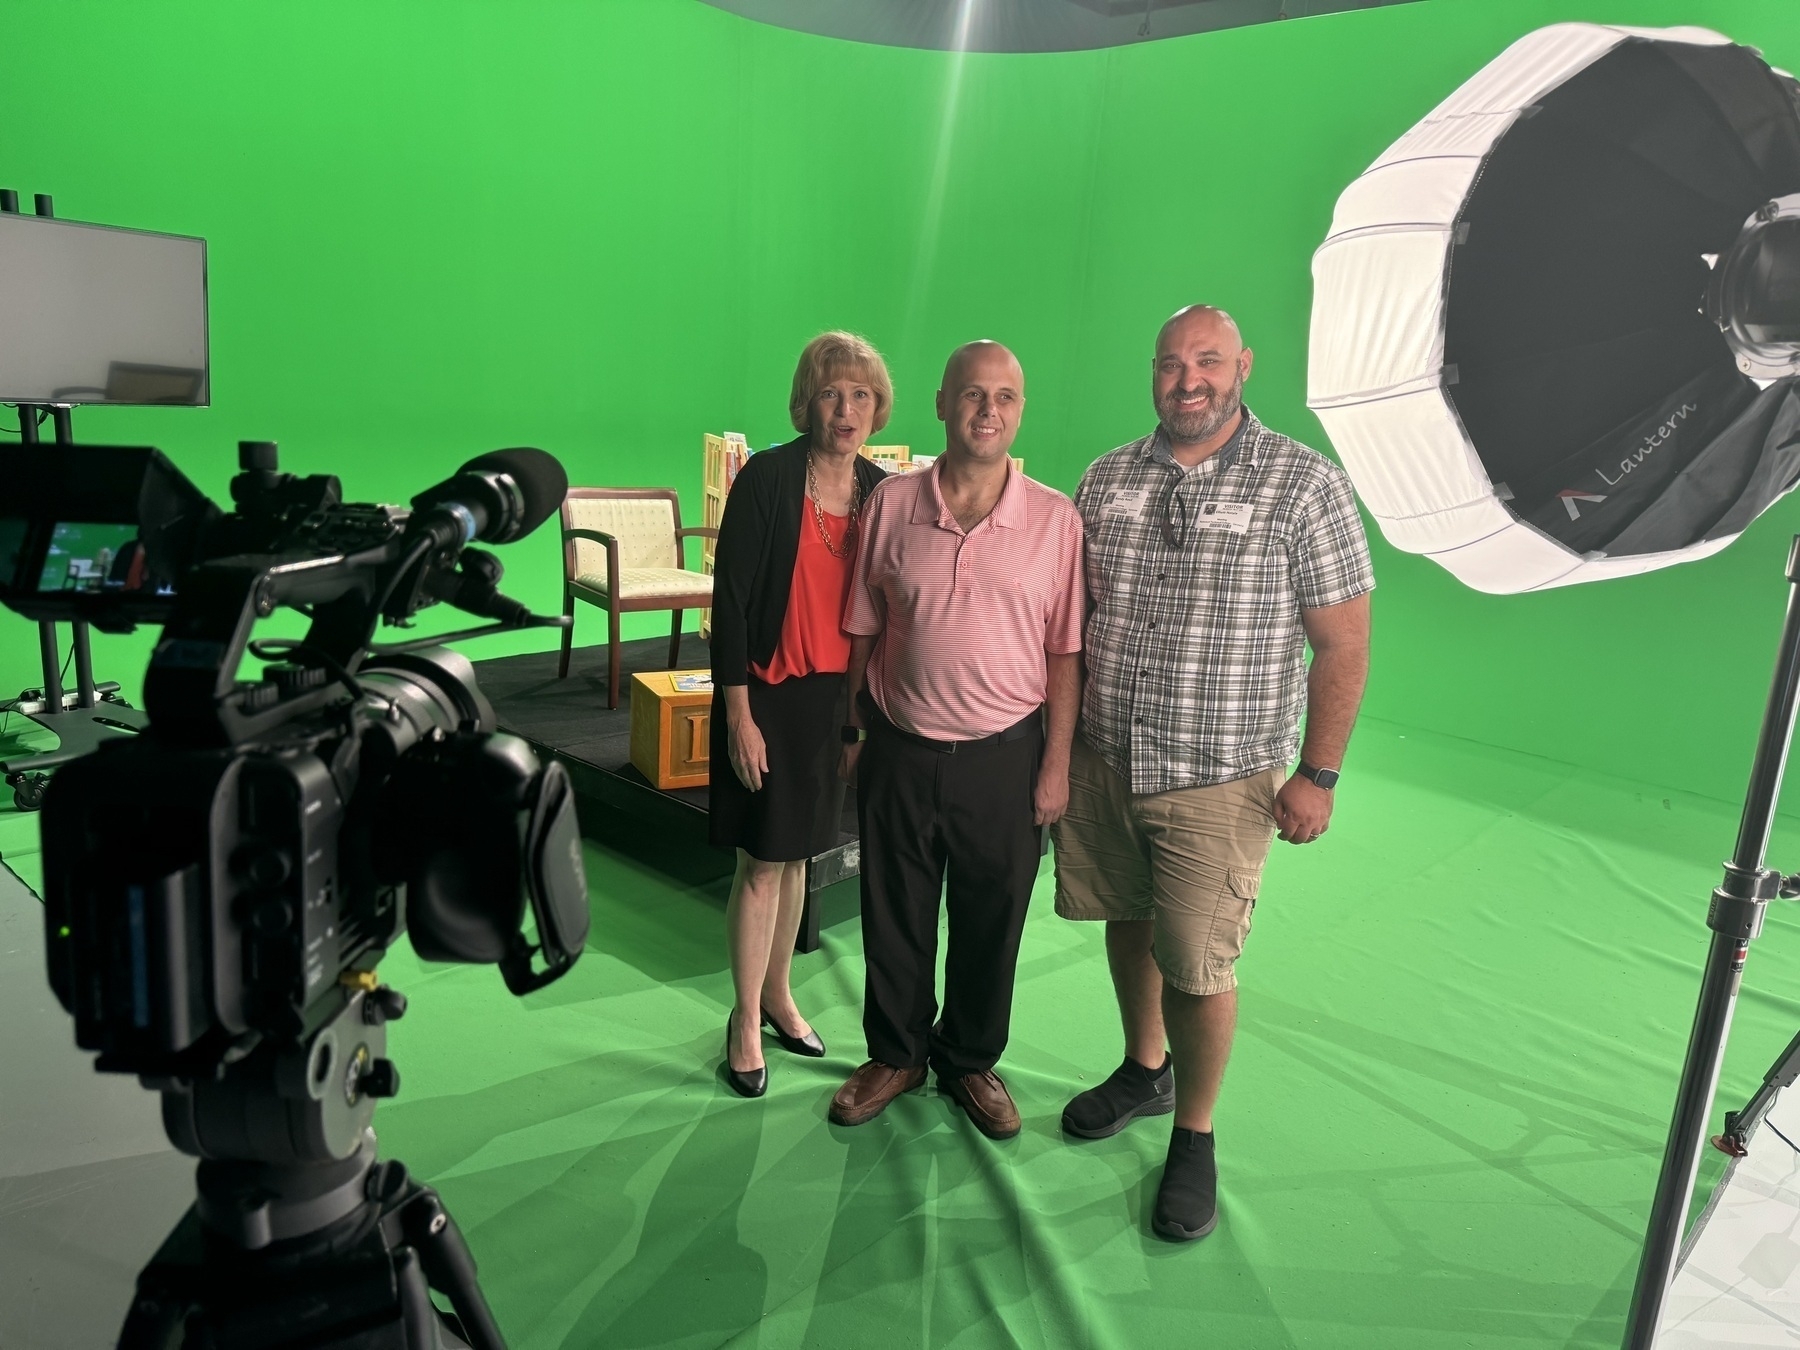 Auto-generated description: Three people are standing and smiling in a green screen studio, surrounded by filming equipment and lights.